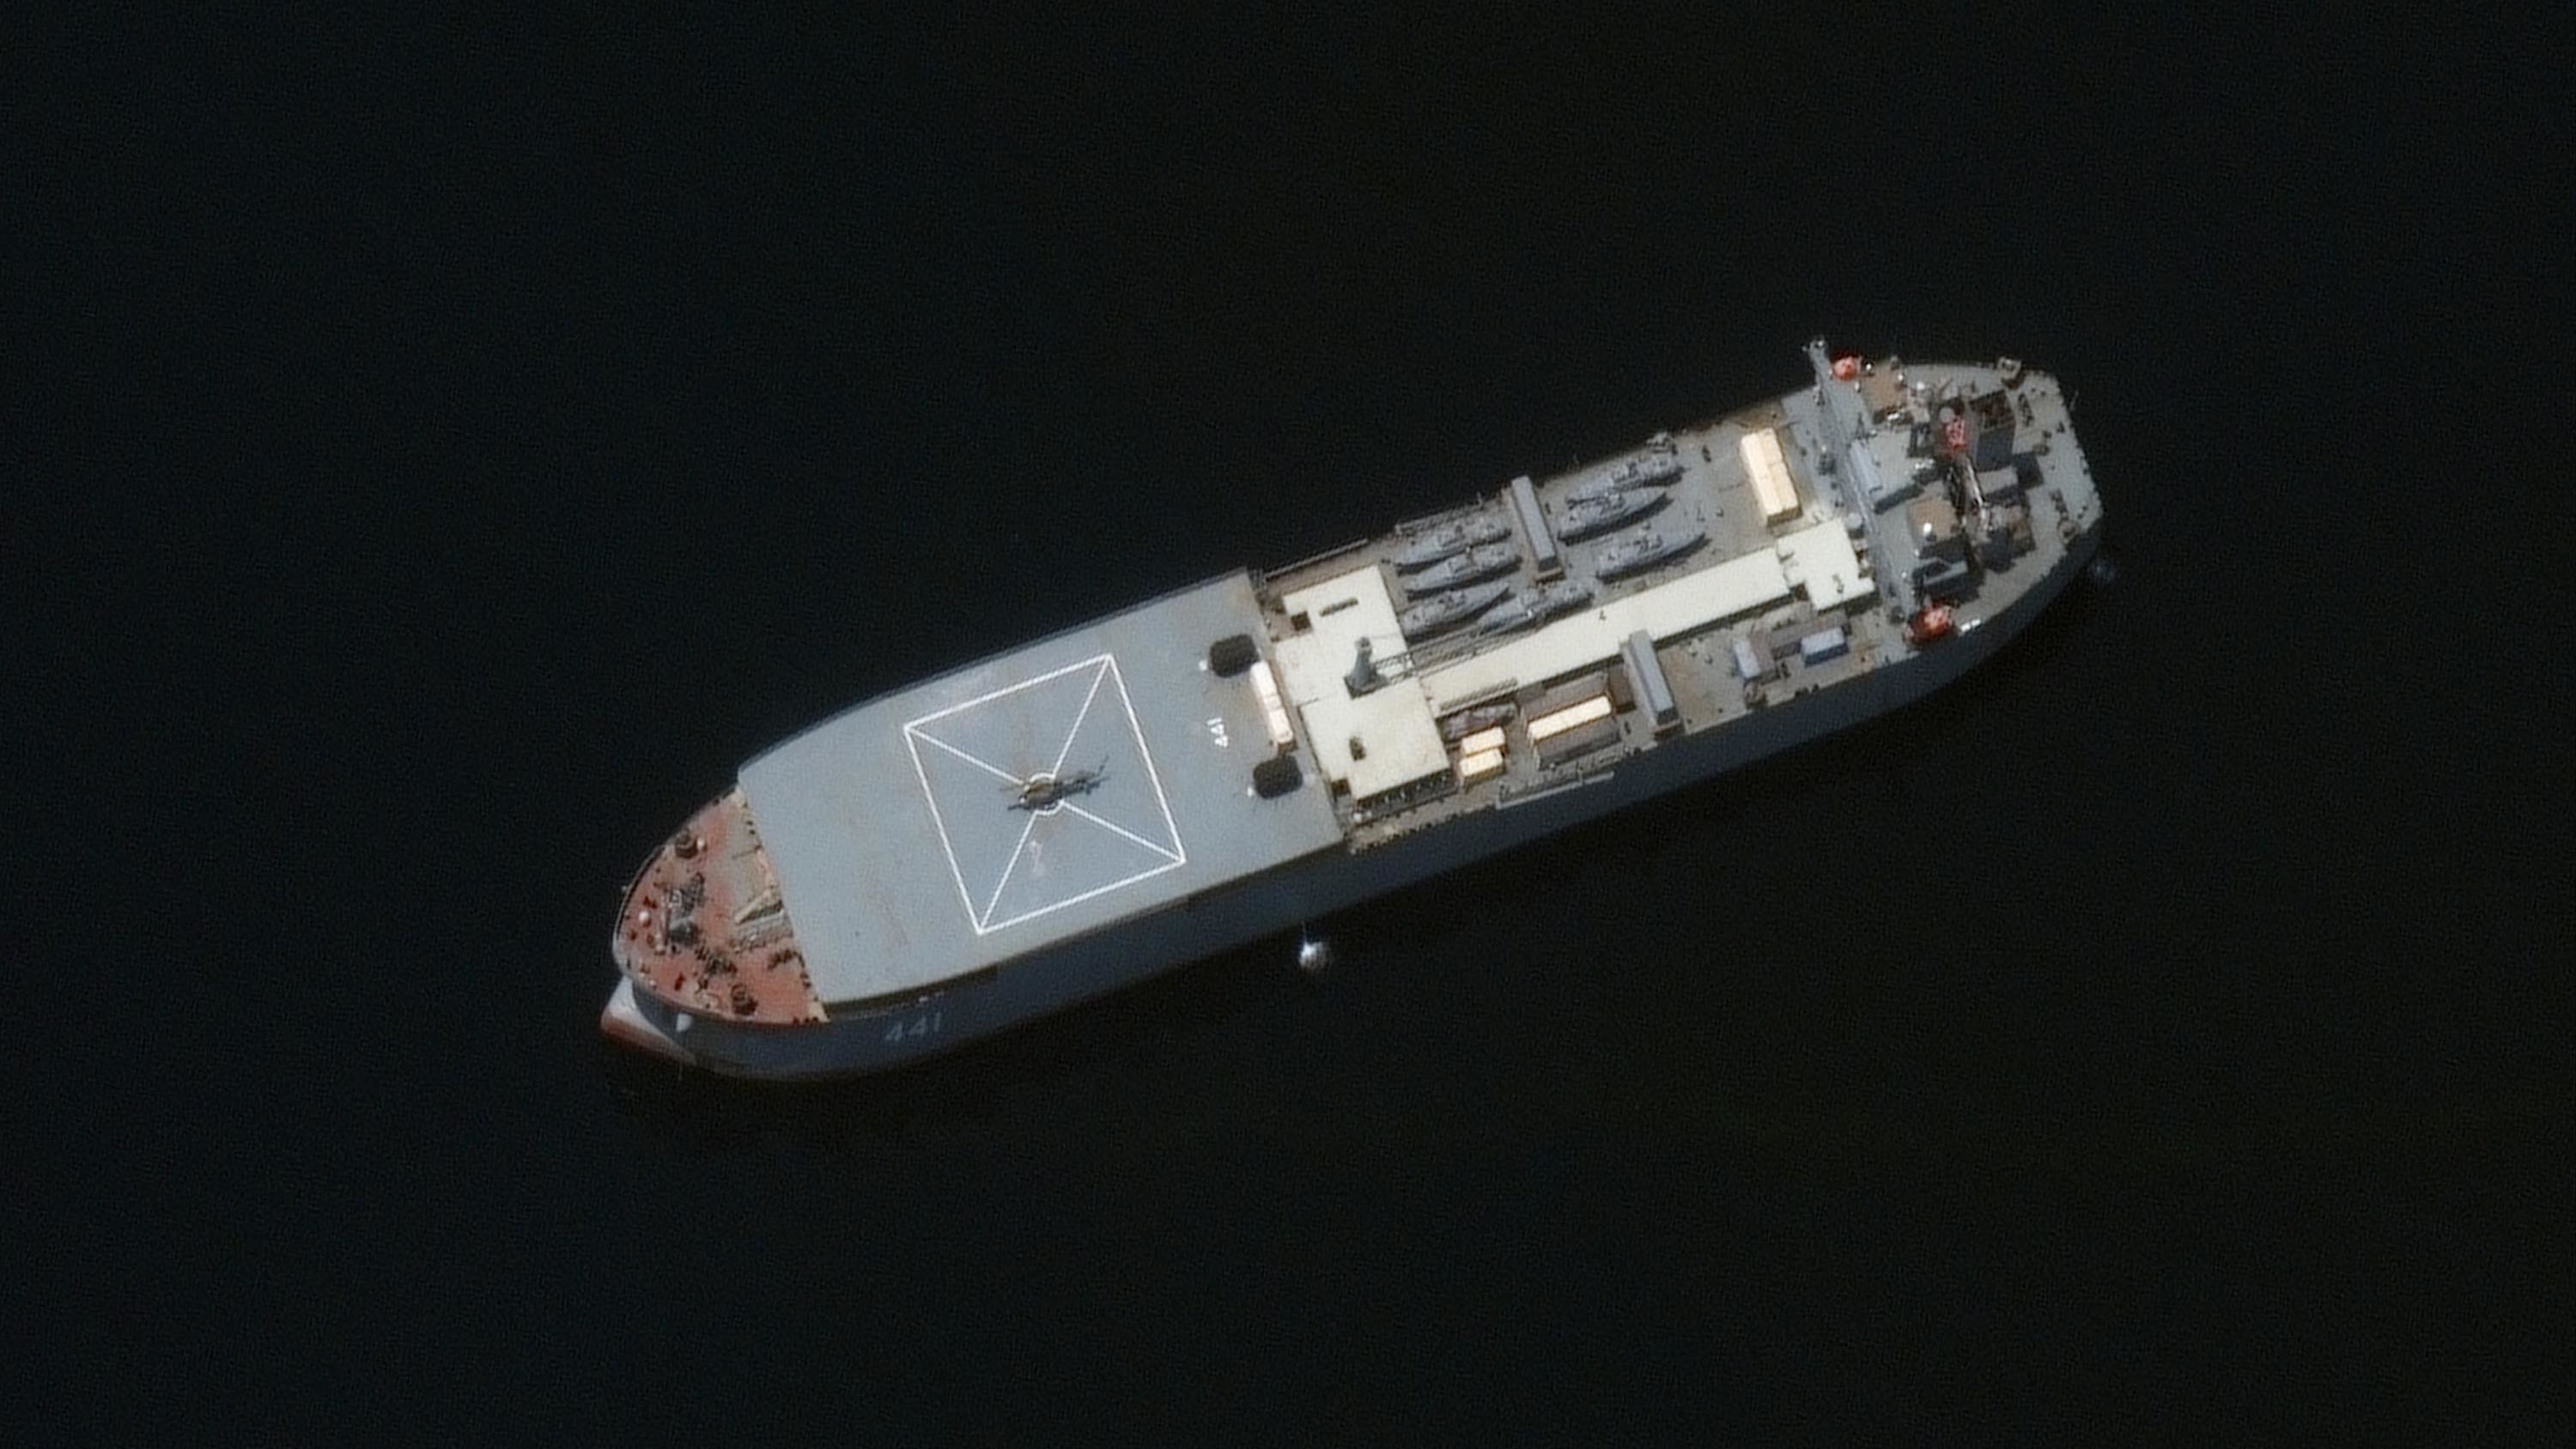 The Iranian ship Makran is seen in this Maxar Technologies satellite image from early May in the Persian Gulf around Larak Island. The vessel appears to be loaded with seven small fast-attack boats on its deck. 